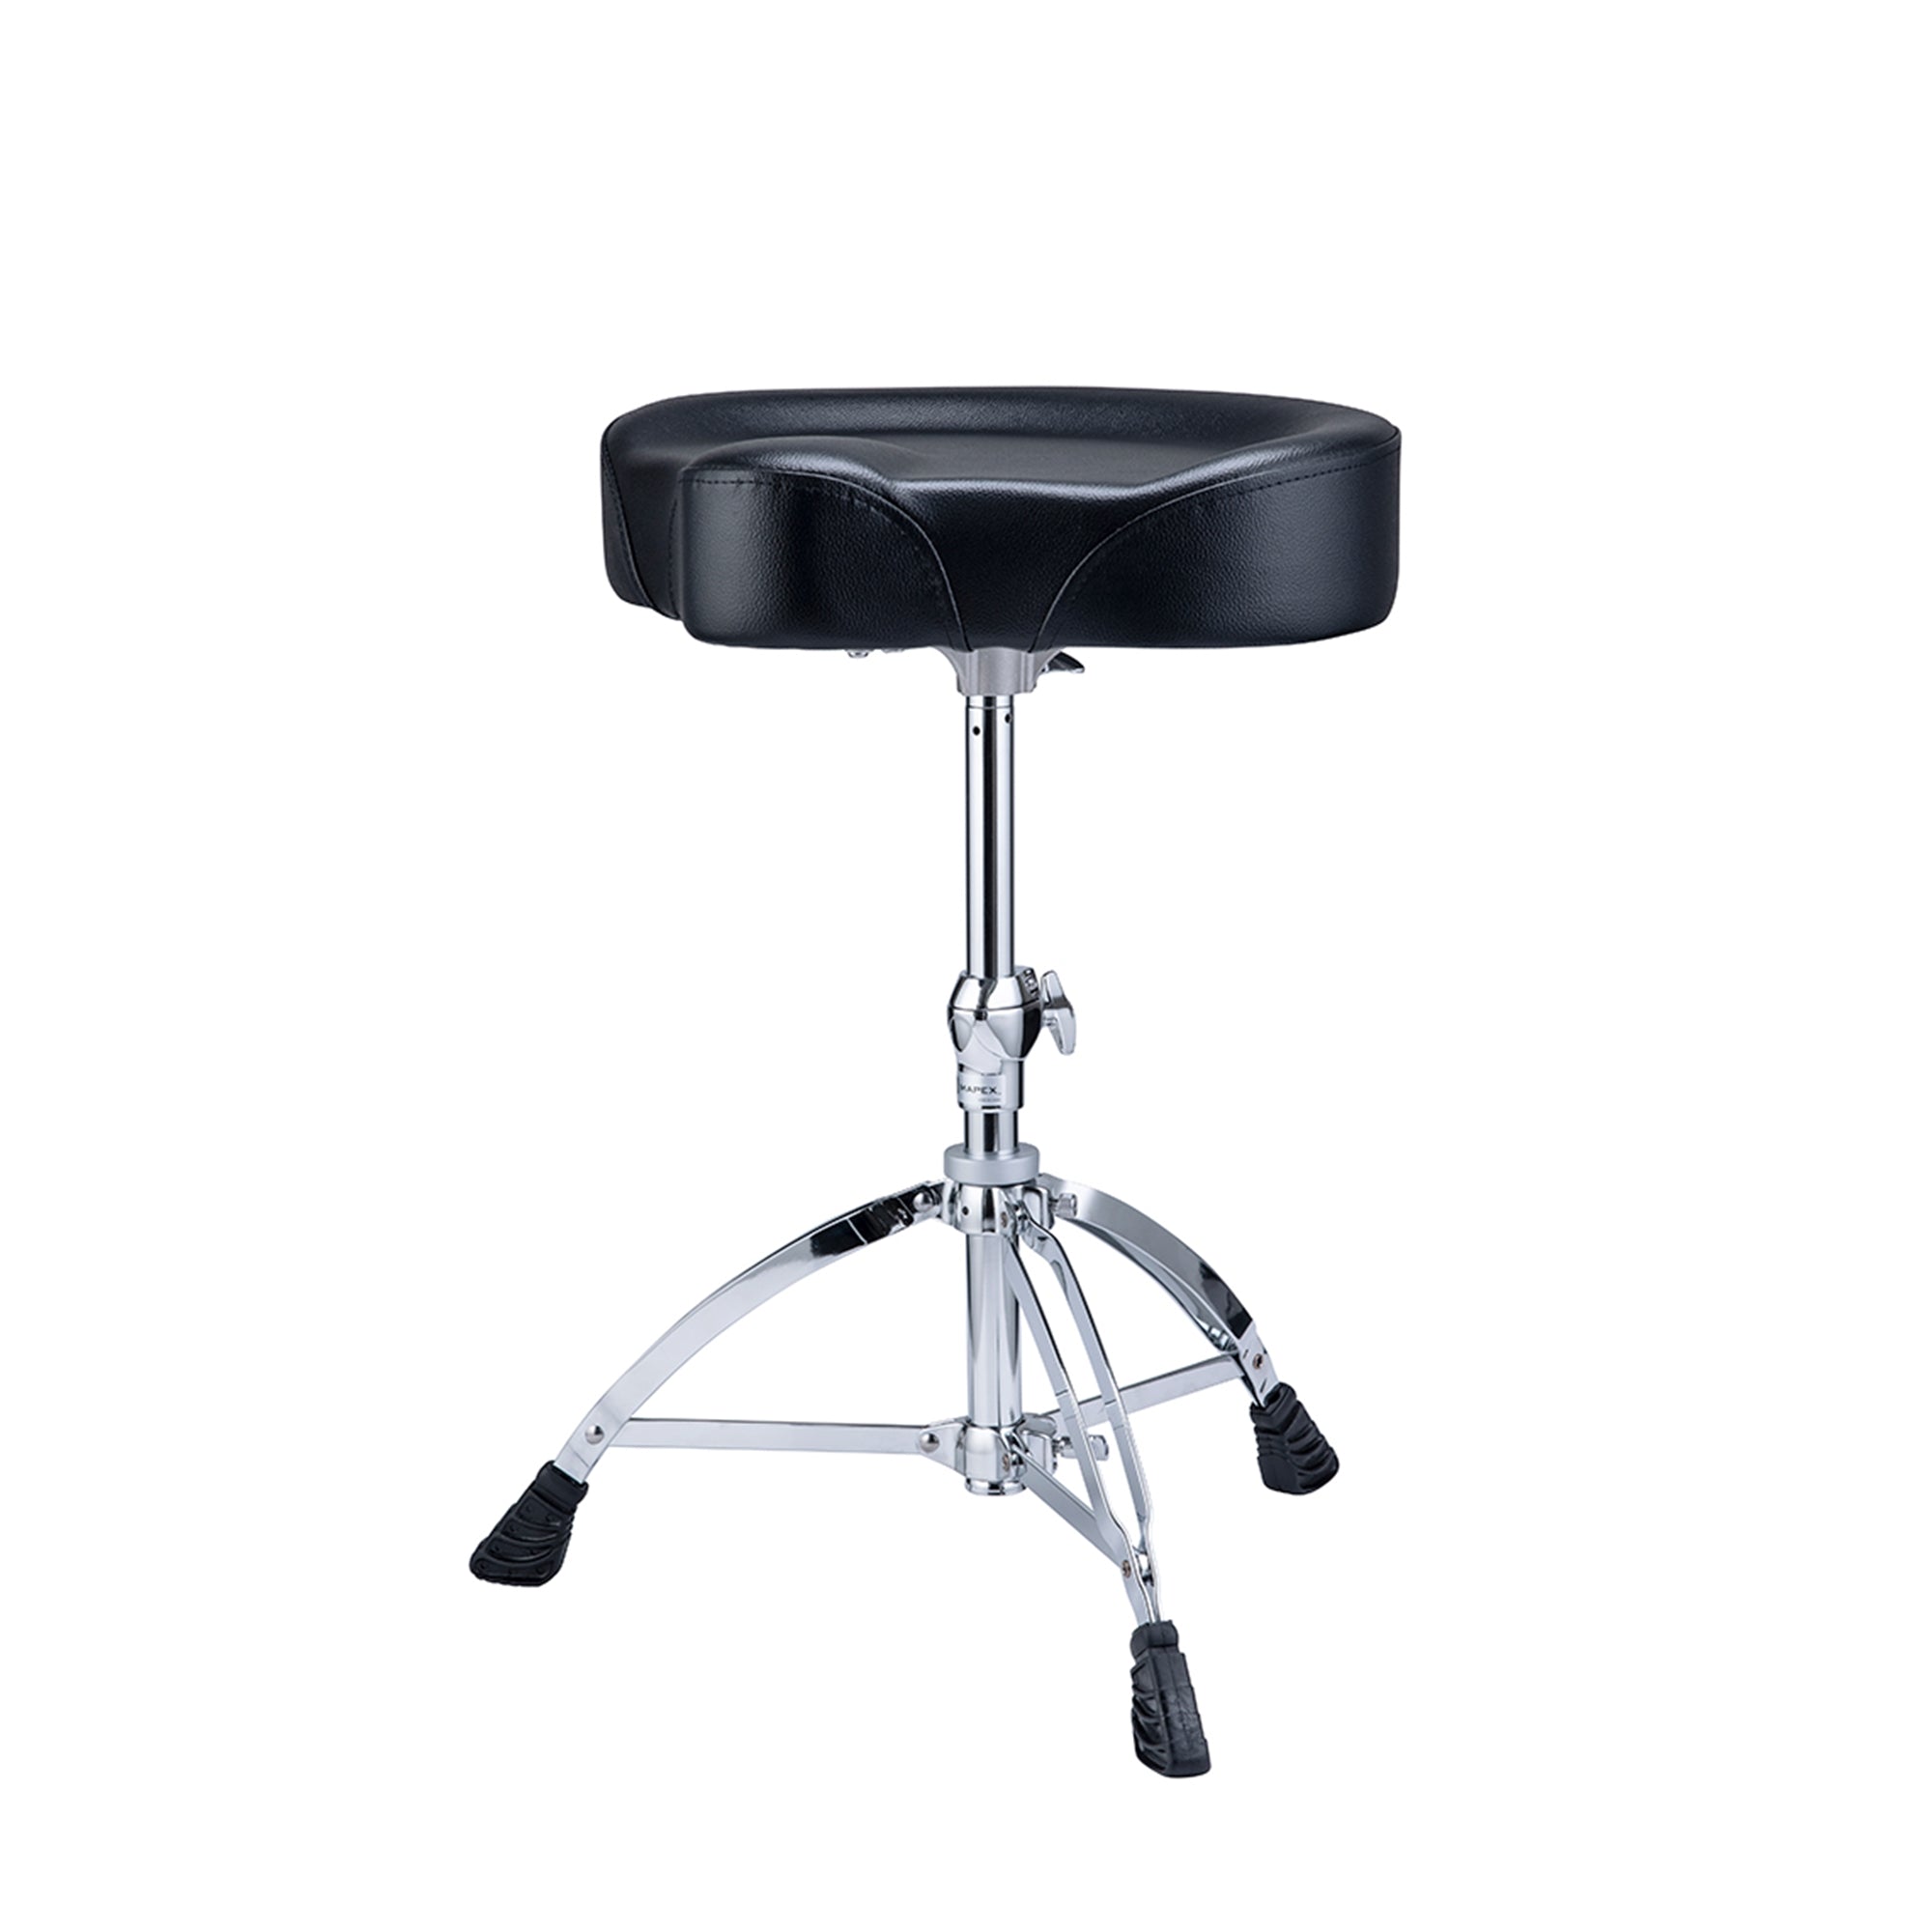 Mapex T675 Saddle Seat Top Spindle Throne